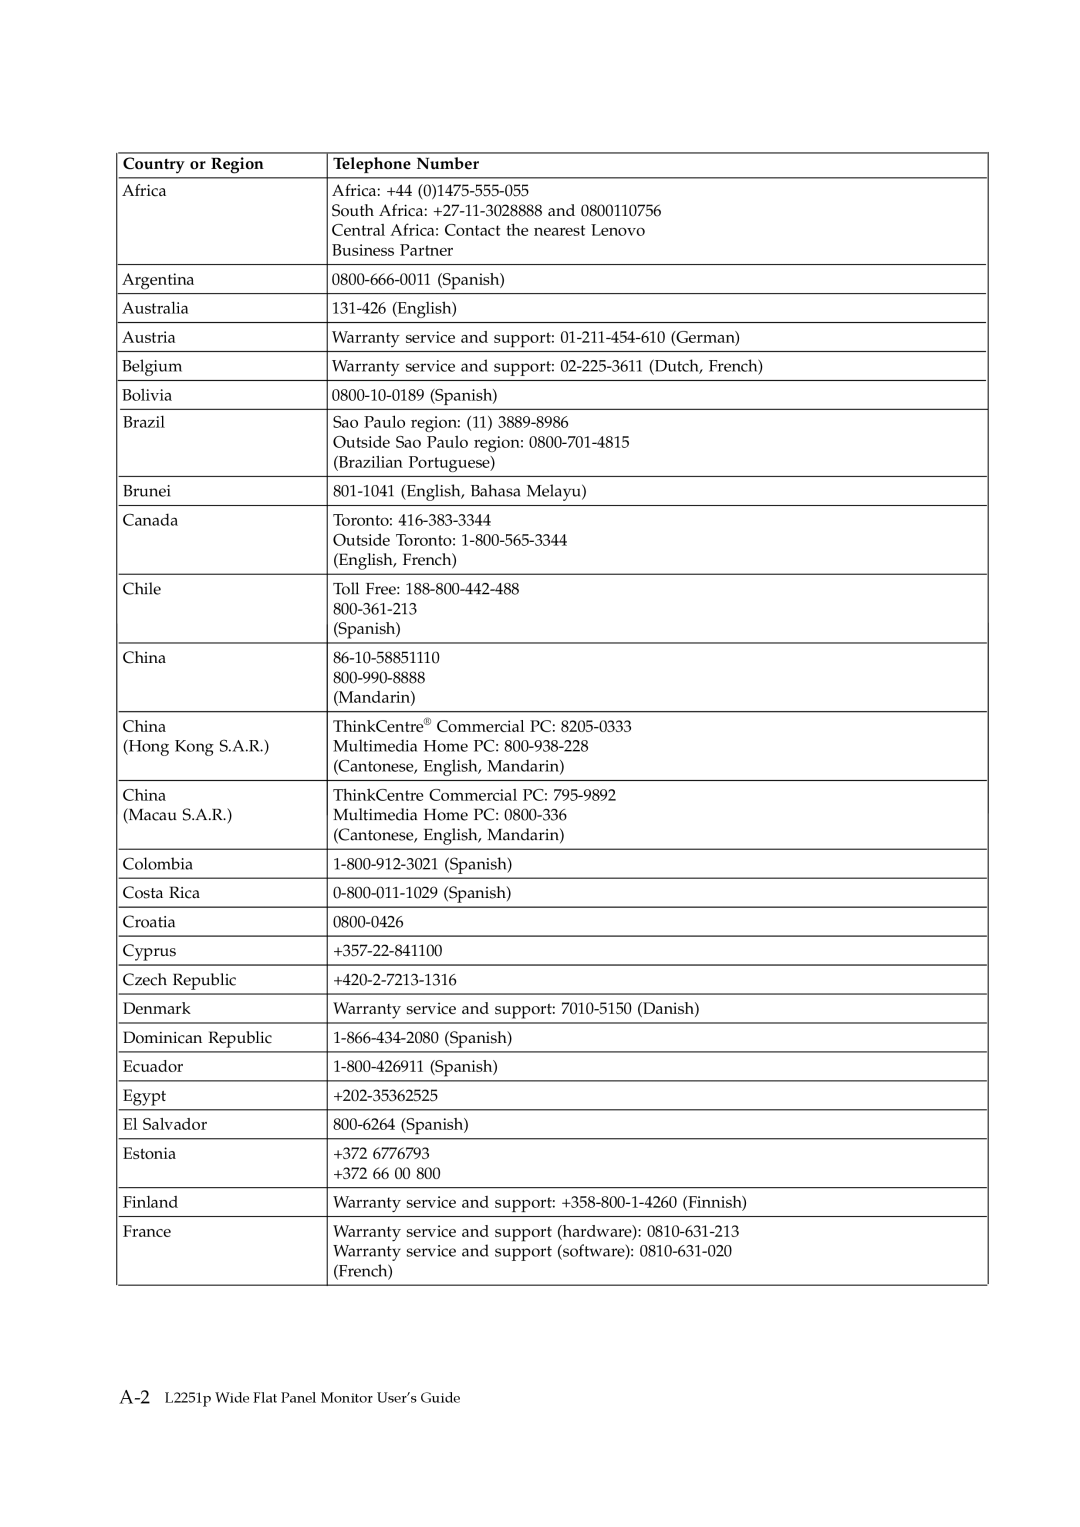 Lenovo manual Country or Region, Telephone Number, A-2 L2251p Wide Flat Panel Monitor User’s Guide 